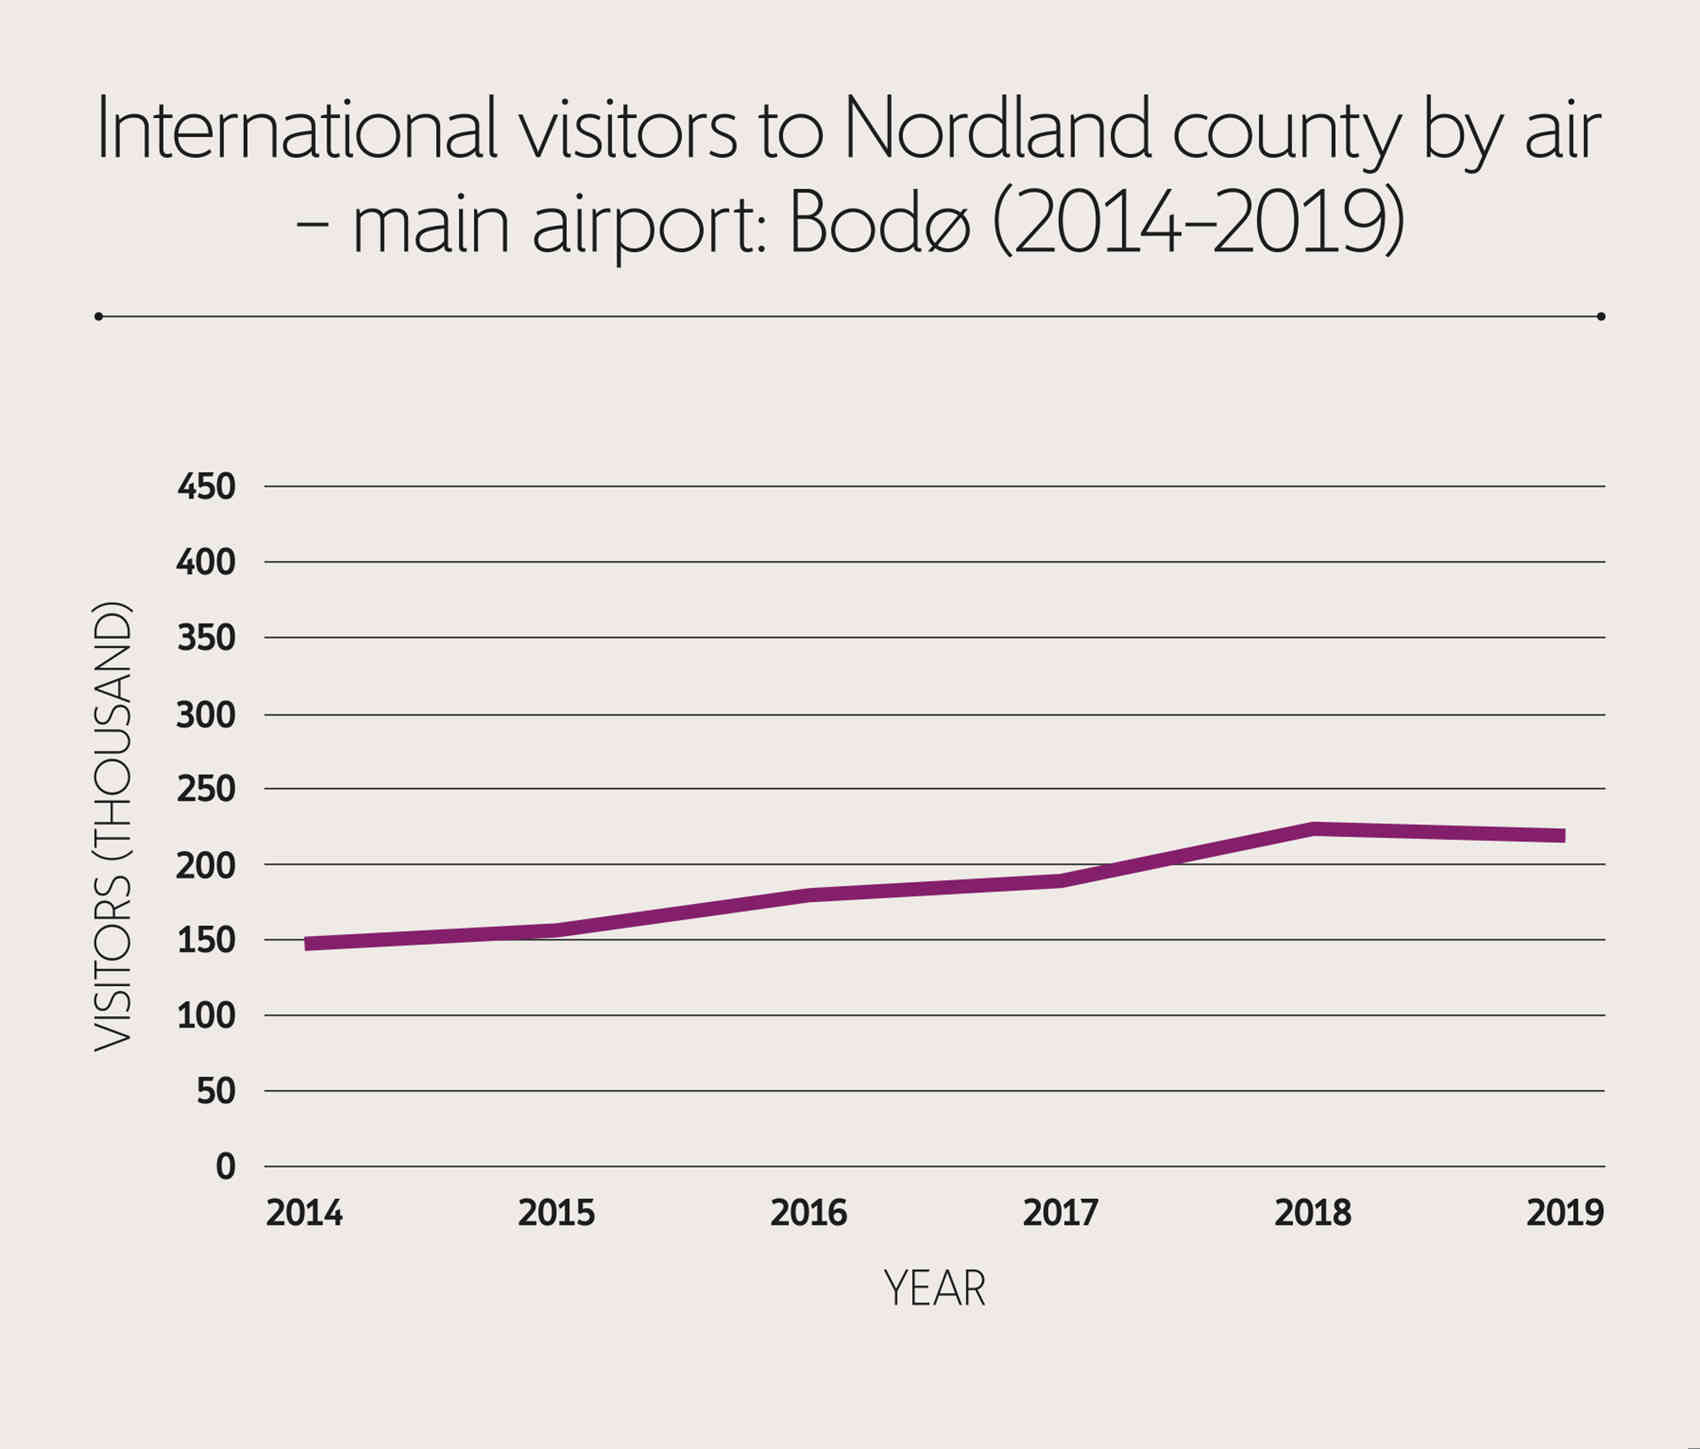 International visitors to Nordland county by air have risen almost 150,000 in 2014 to about over 220,000 in 2019.